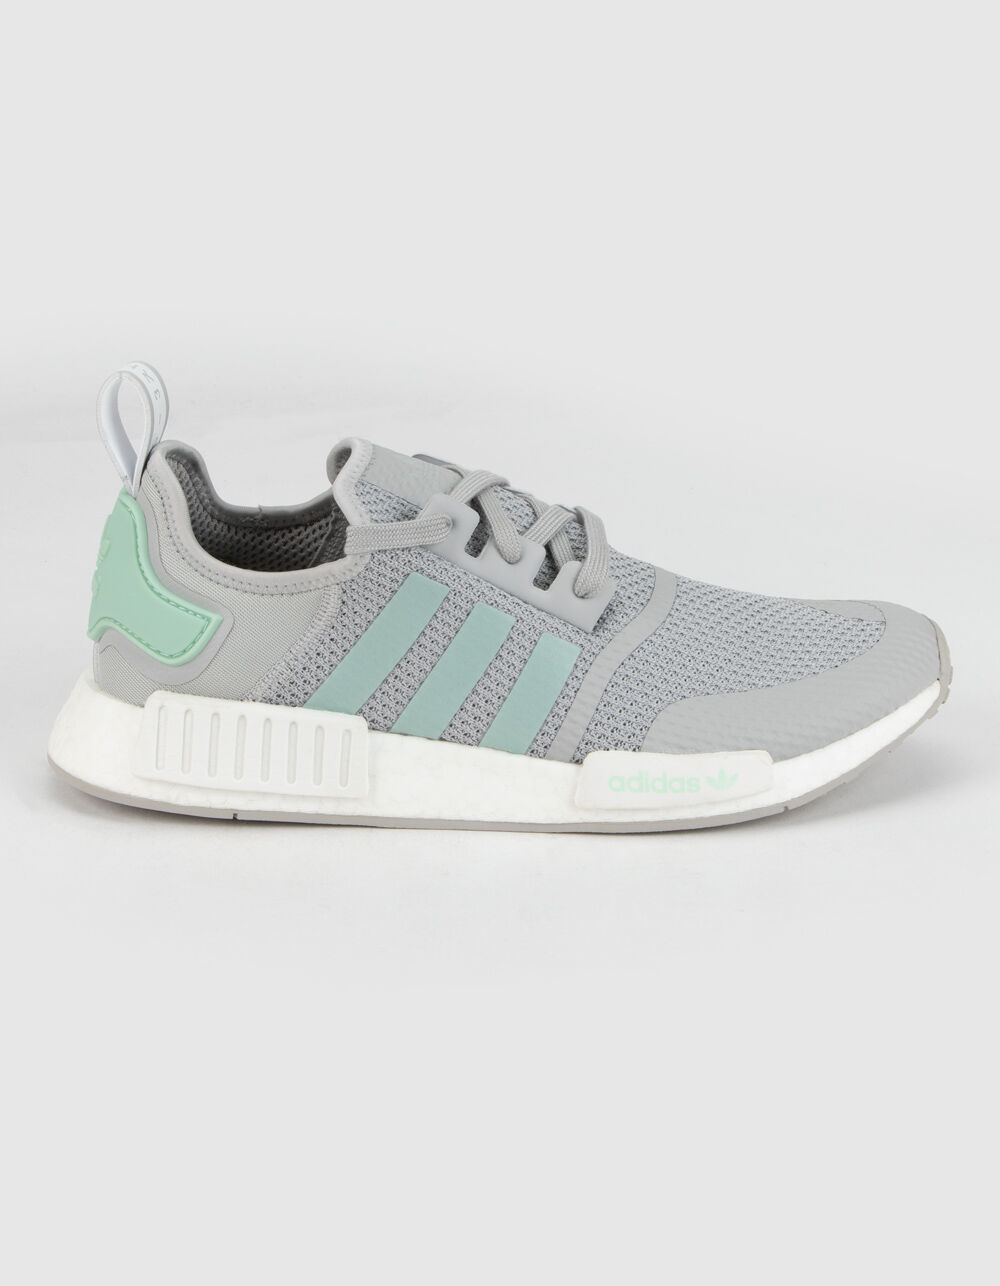 ADIDAS NMD_R1 Gray & Mint Shoes - GRAY/MINT | Tillys